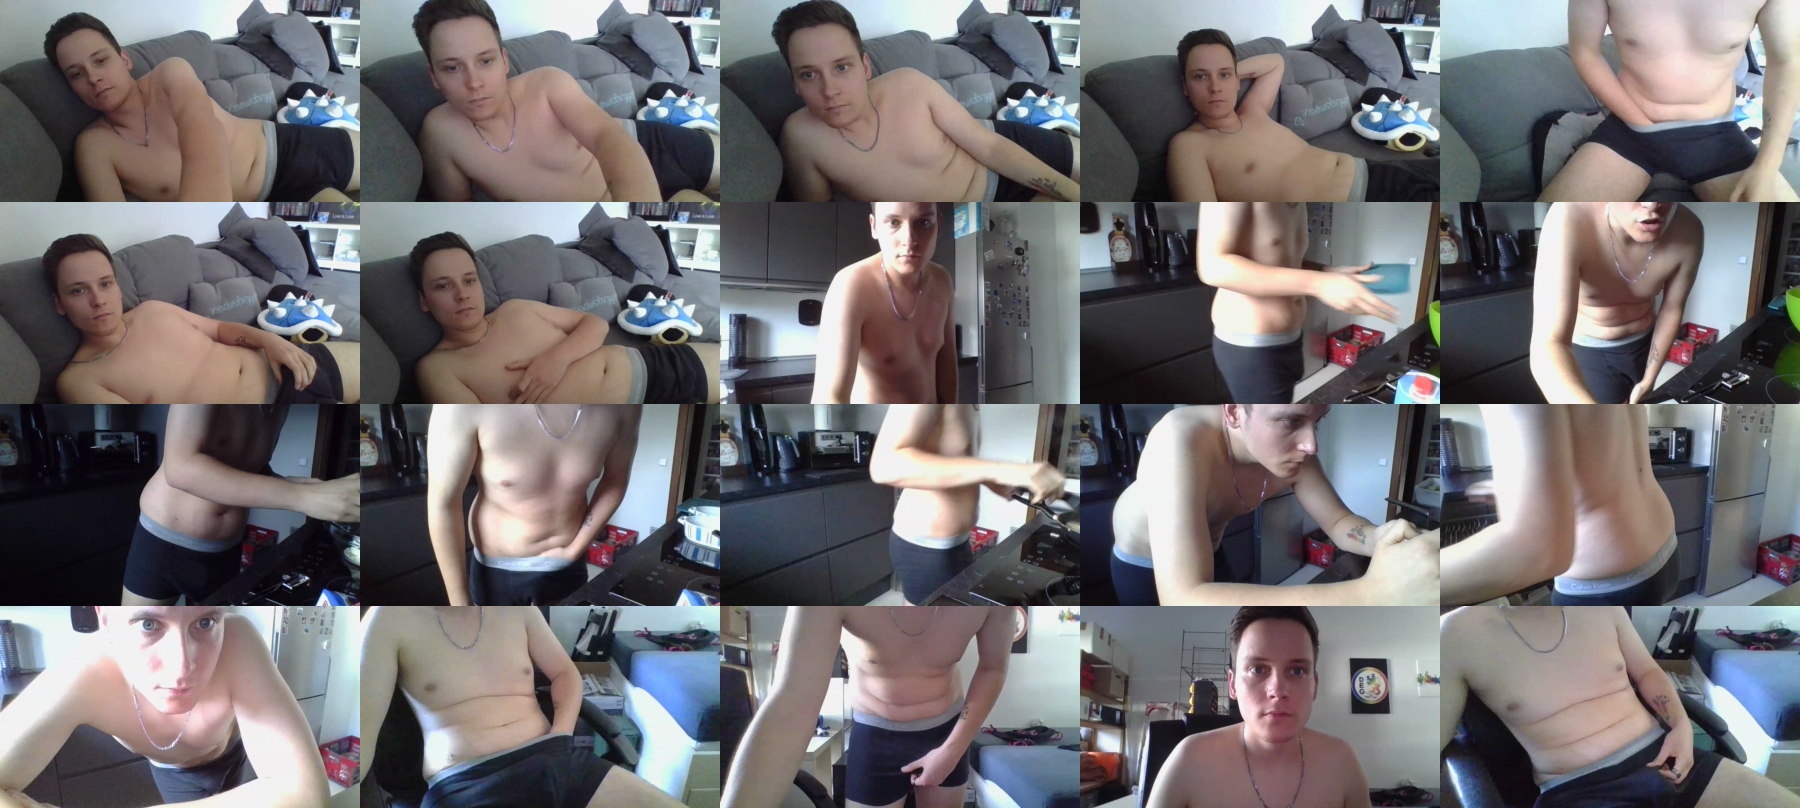 justin958  26-08-2021 Recorded Video Naked